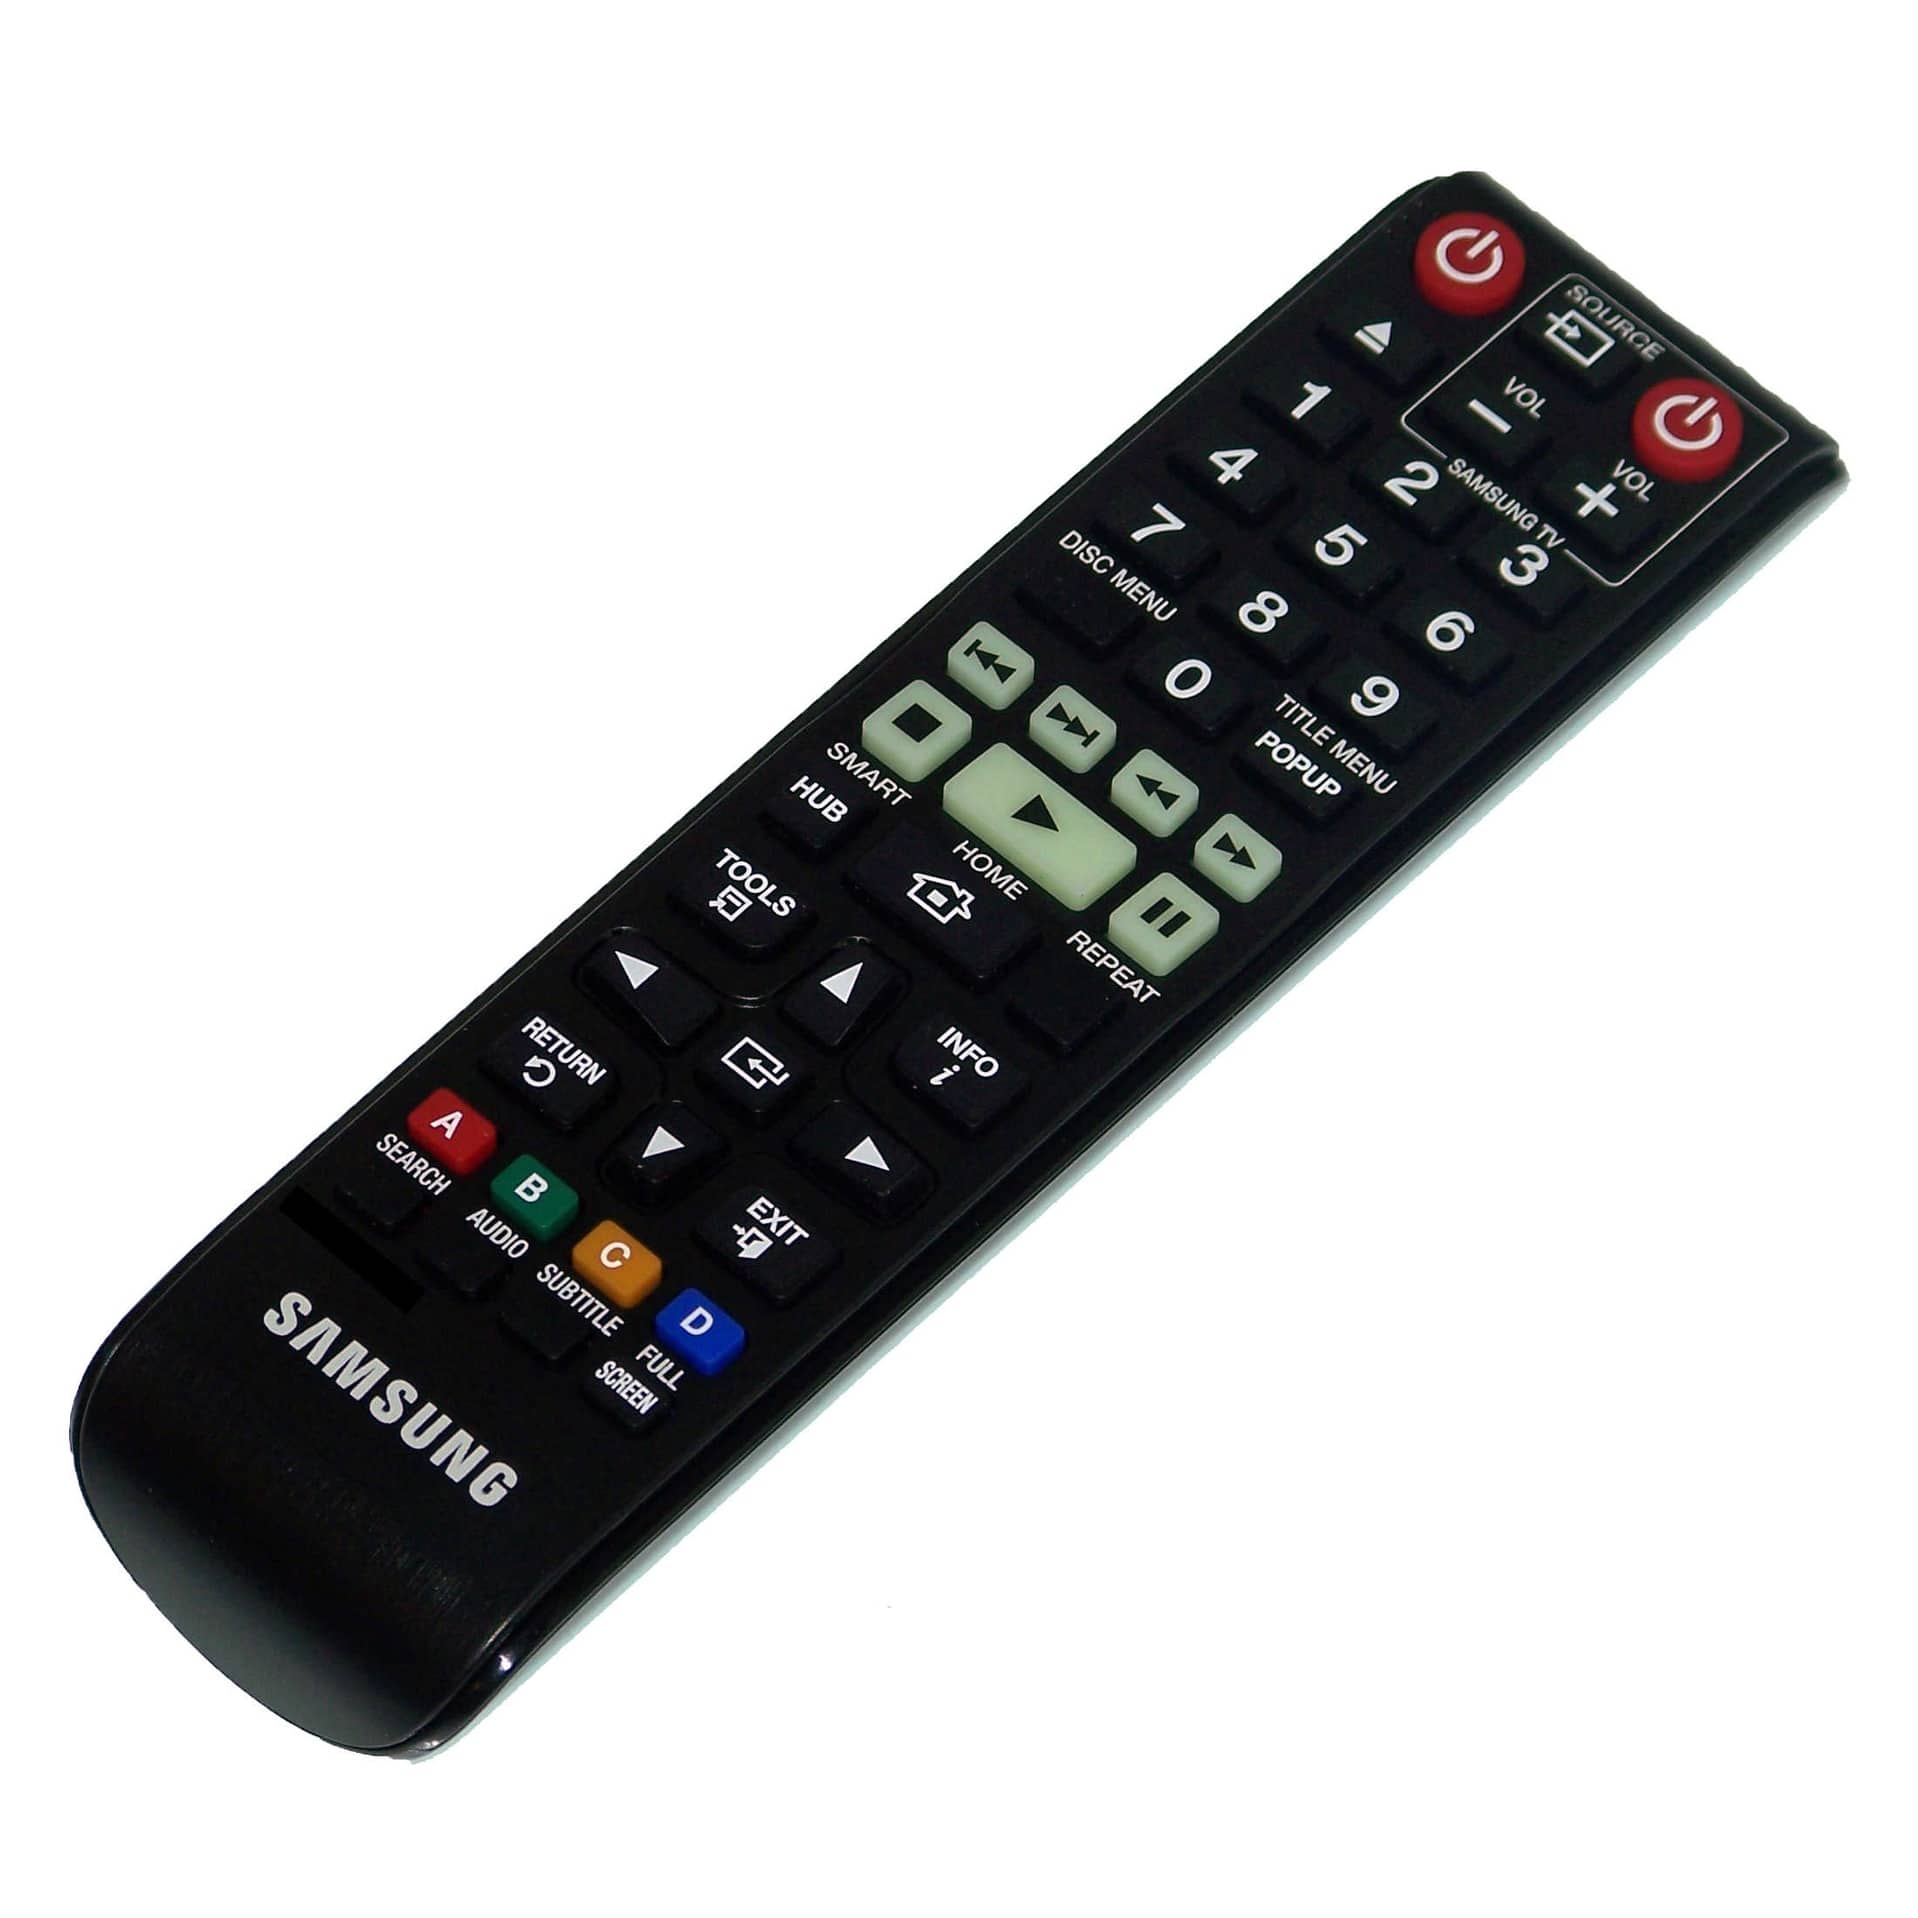 OEM Samsung Remote Control Shipped With BDJ6300 - N/A